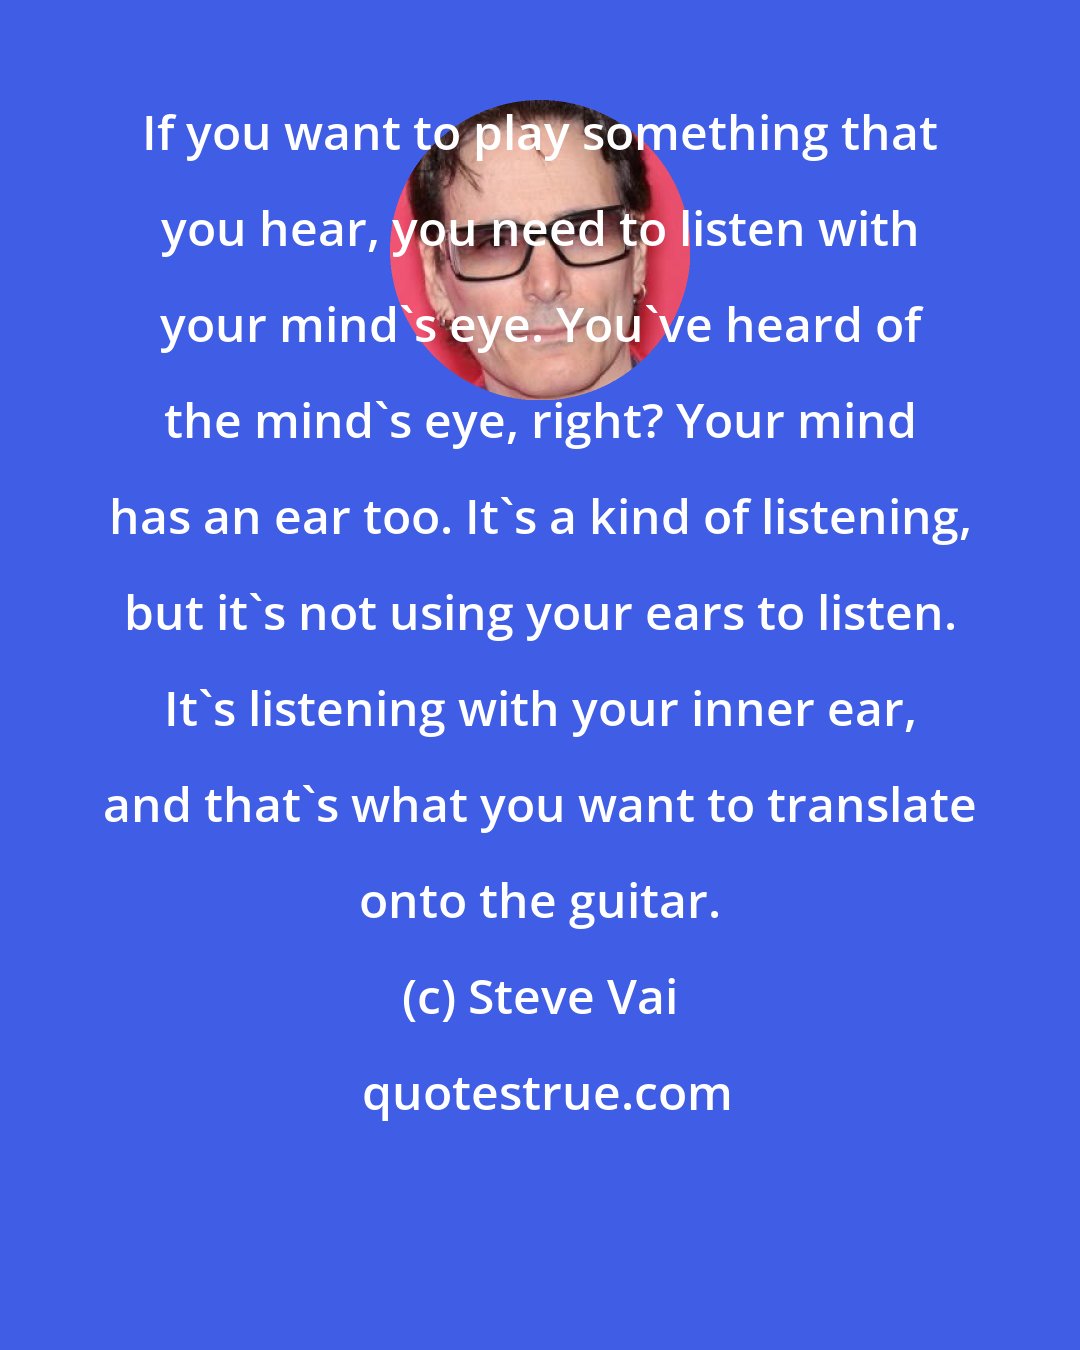 Steve Vai: If you want to play something that you hear, you need to listen with your mind's eye. You've heard of the mind's eye, right? Your mind has an ear too. It's a kind of listening, but it's not using your ears to listen. It's listening with your inner ear, and that's what you want to translate onto the guitar.